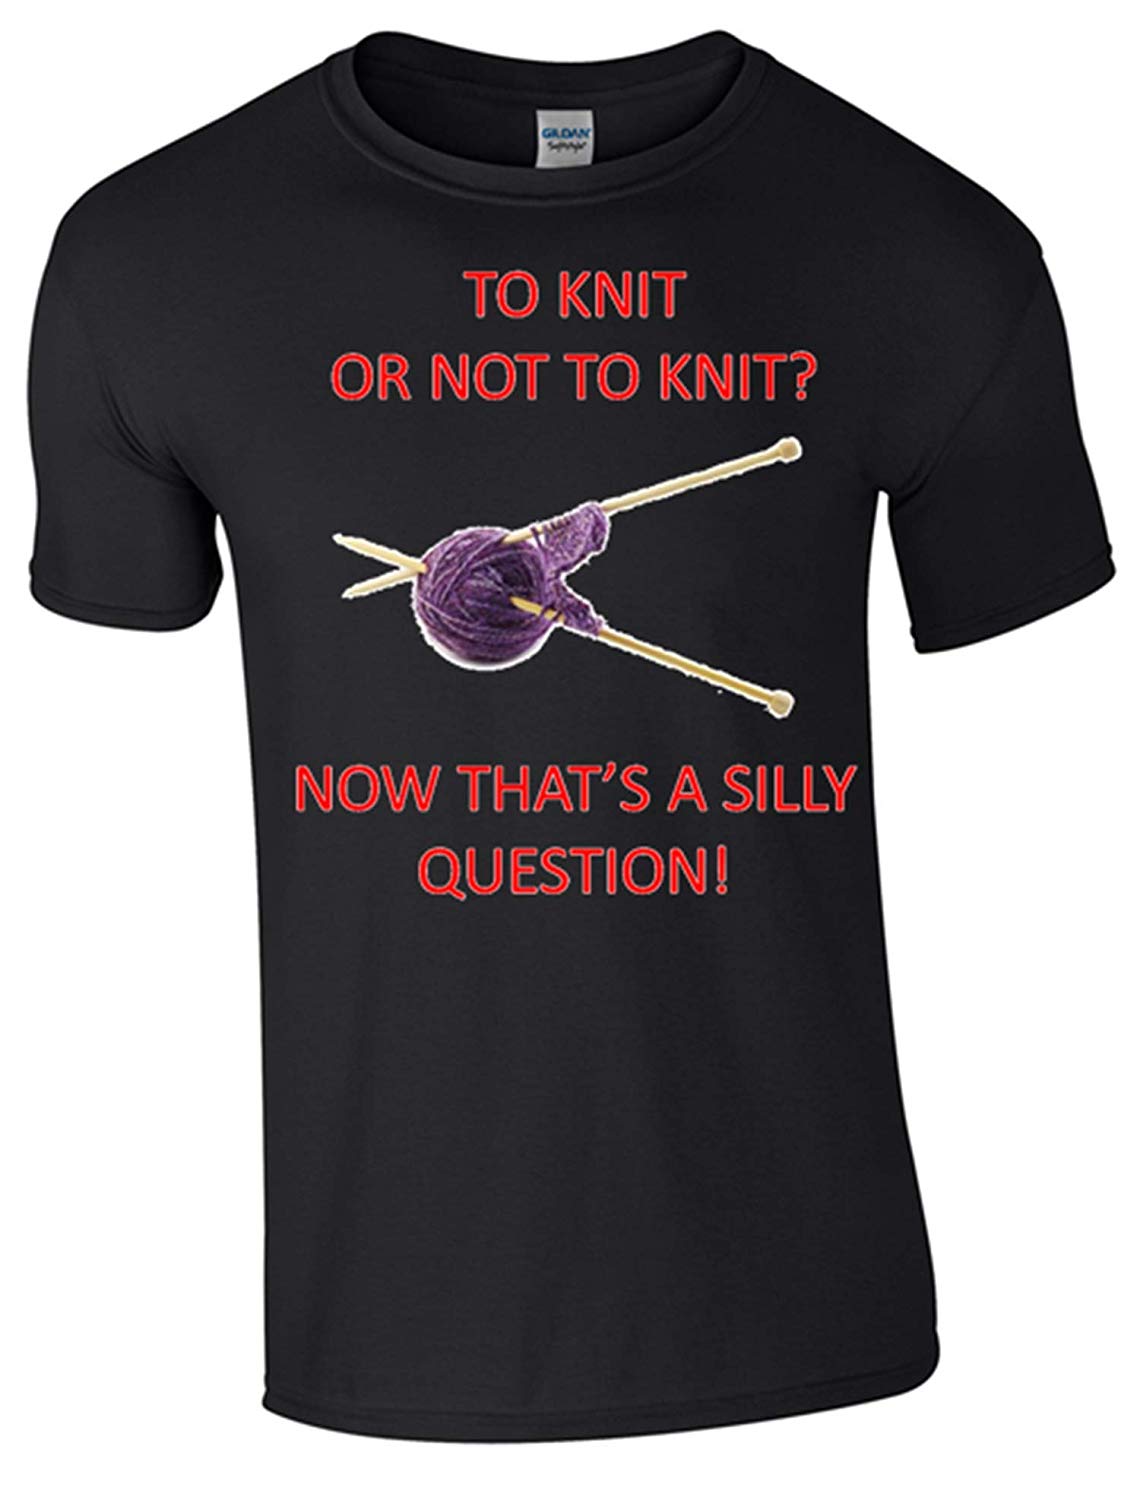 to Knit or not to Knit T-Shirt for The Compulsive Knitter in Your Life - Army 1157 Kit  Veterans Owned Business